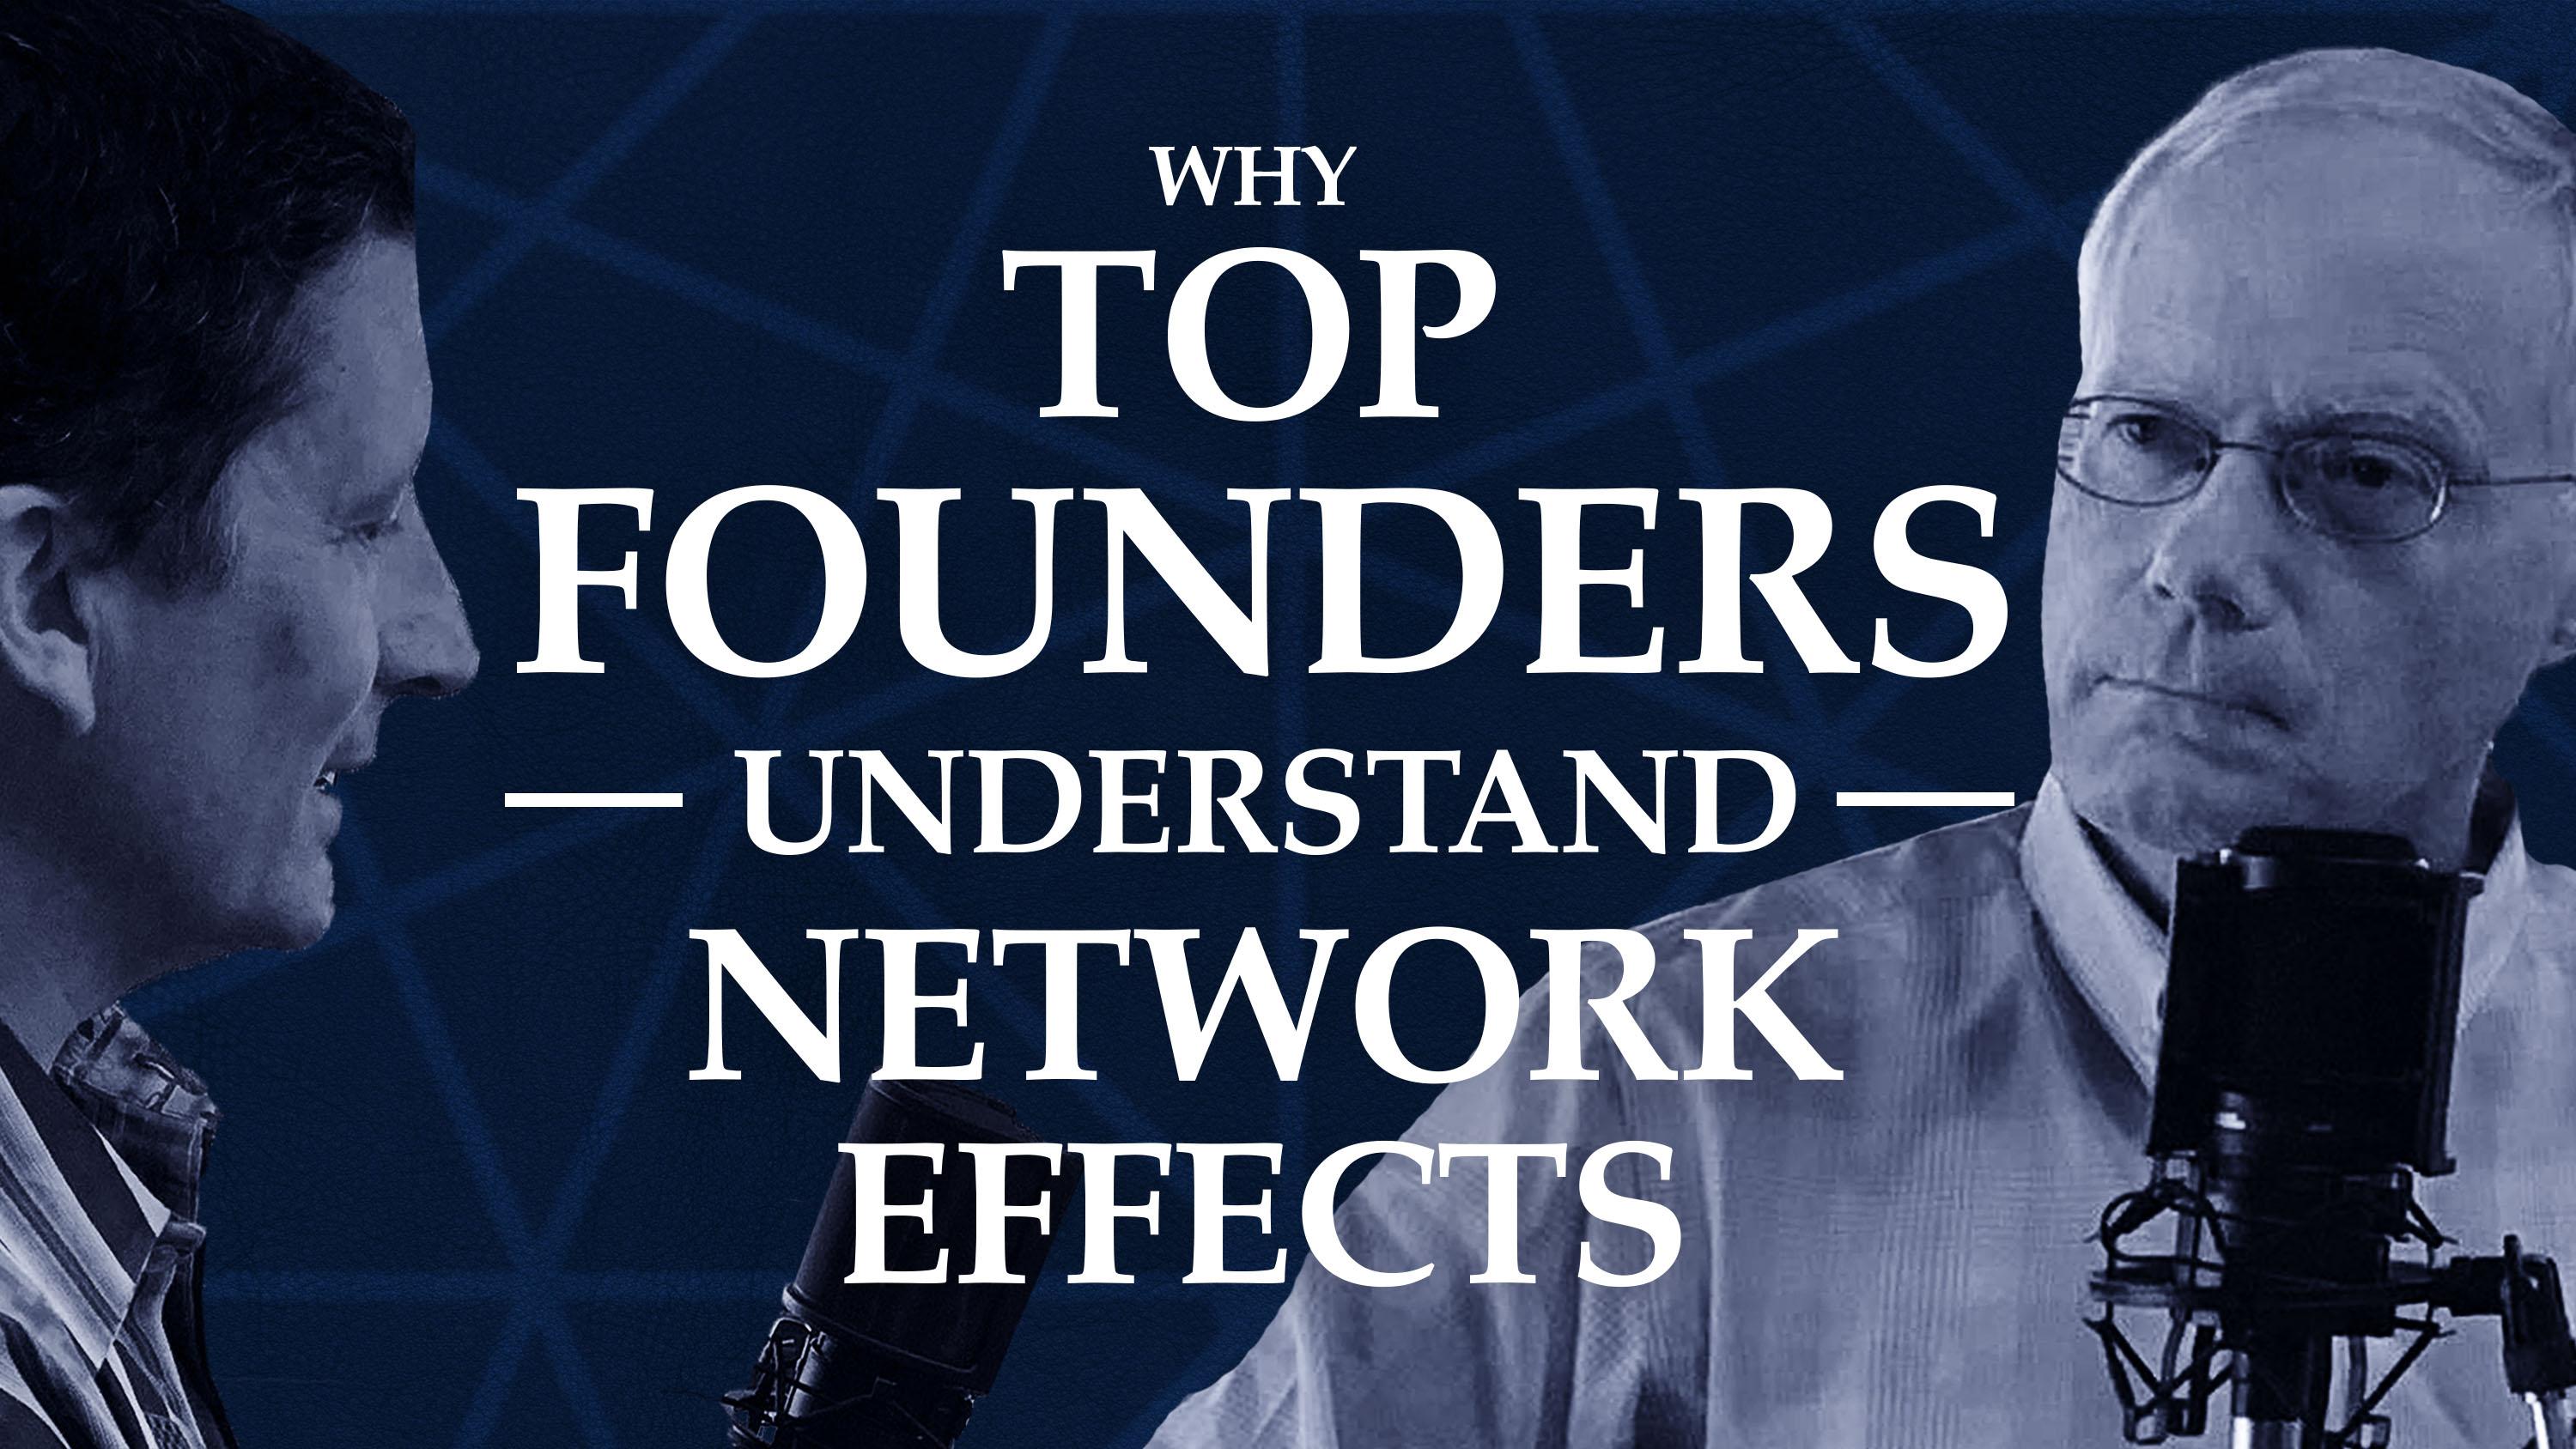 NFX Podcast: Why Top Founders Understand Network Effects with Scott Cook, Founder of Intuit